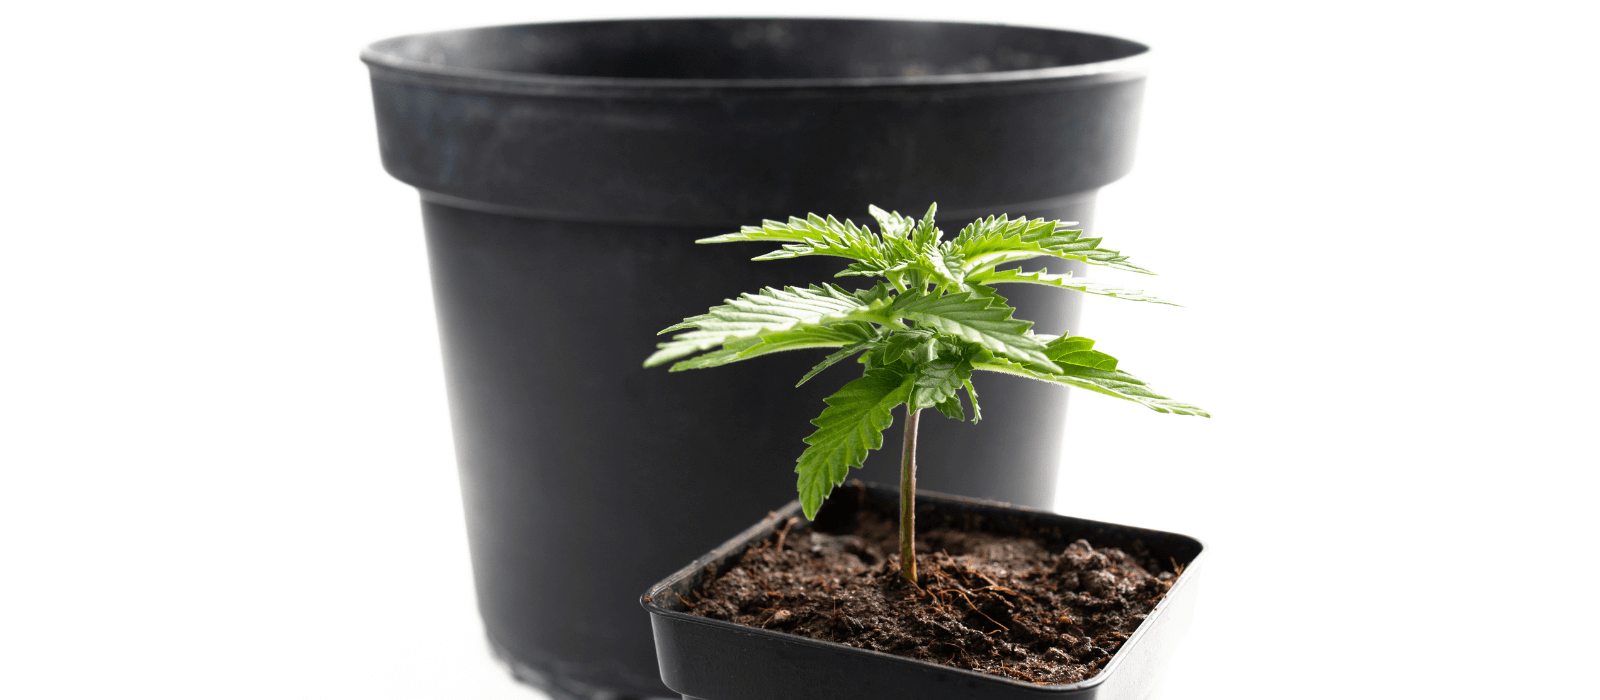 benefits of using larger pots for cannabis growing